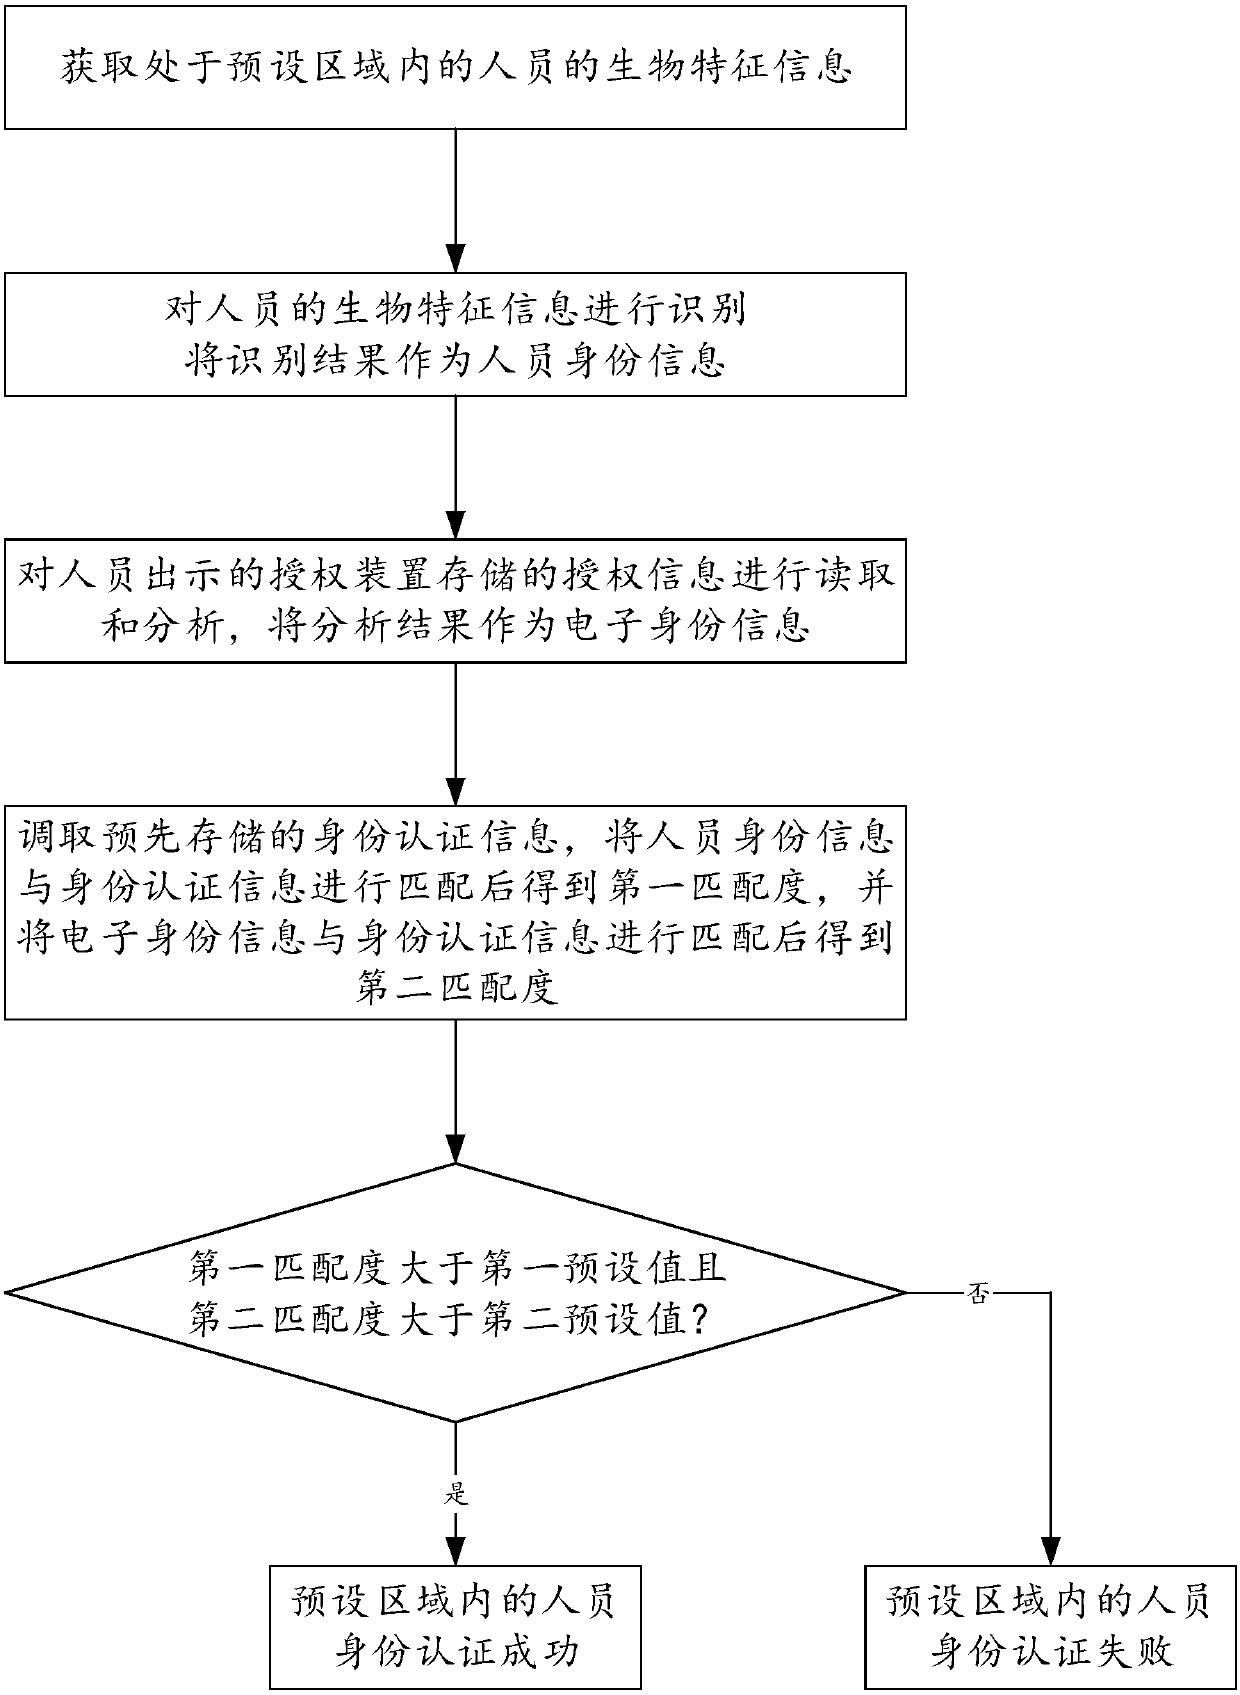 Electronic identity authentication method and authentication system